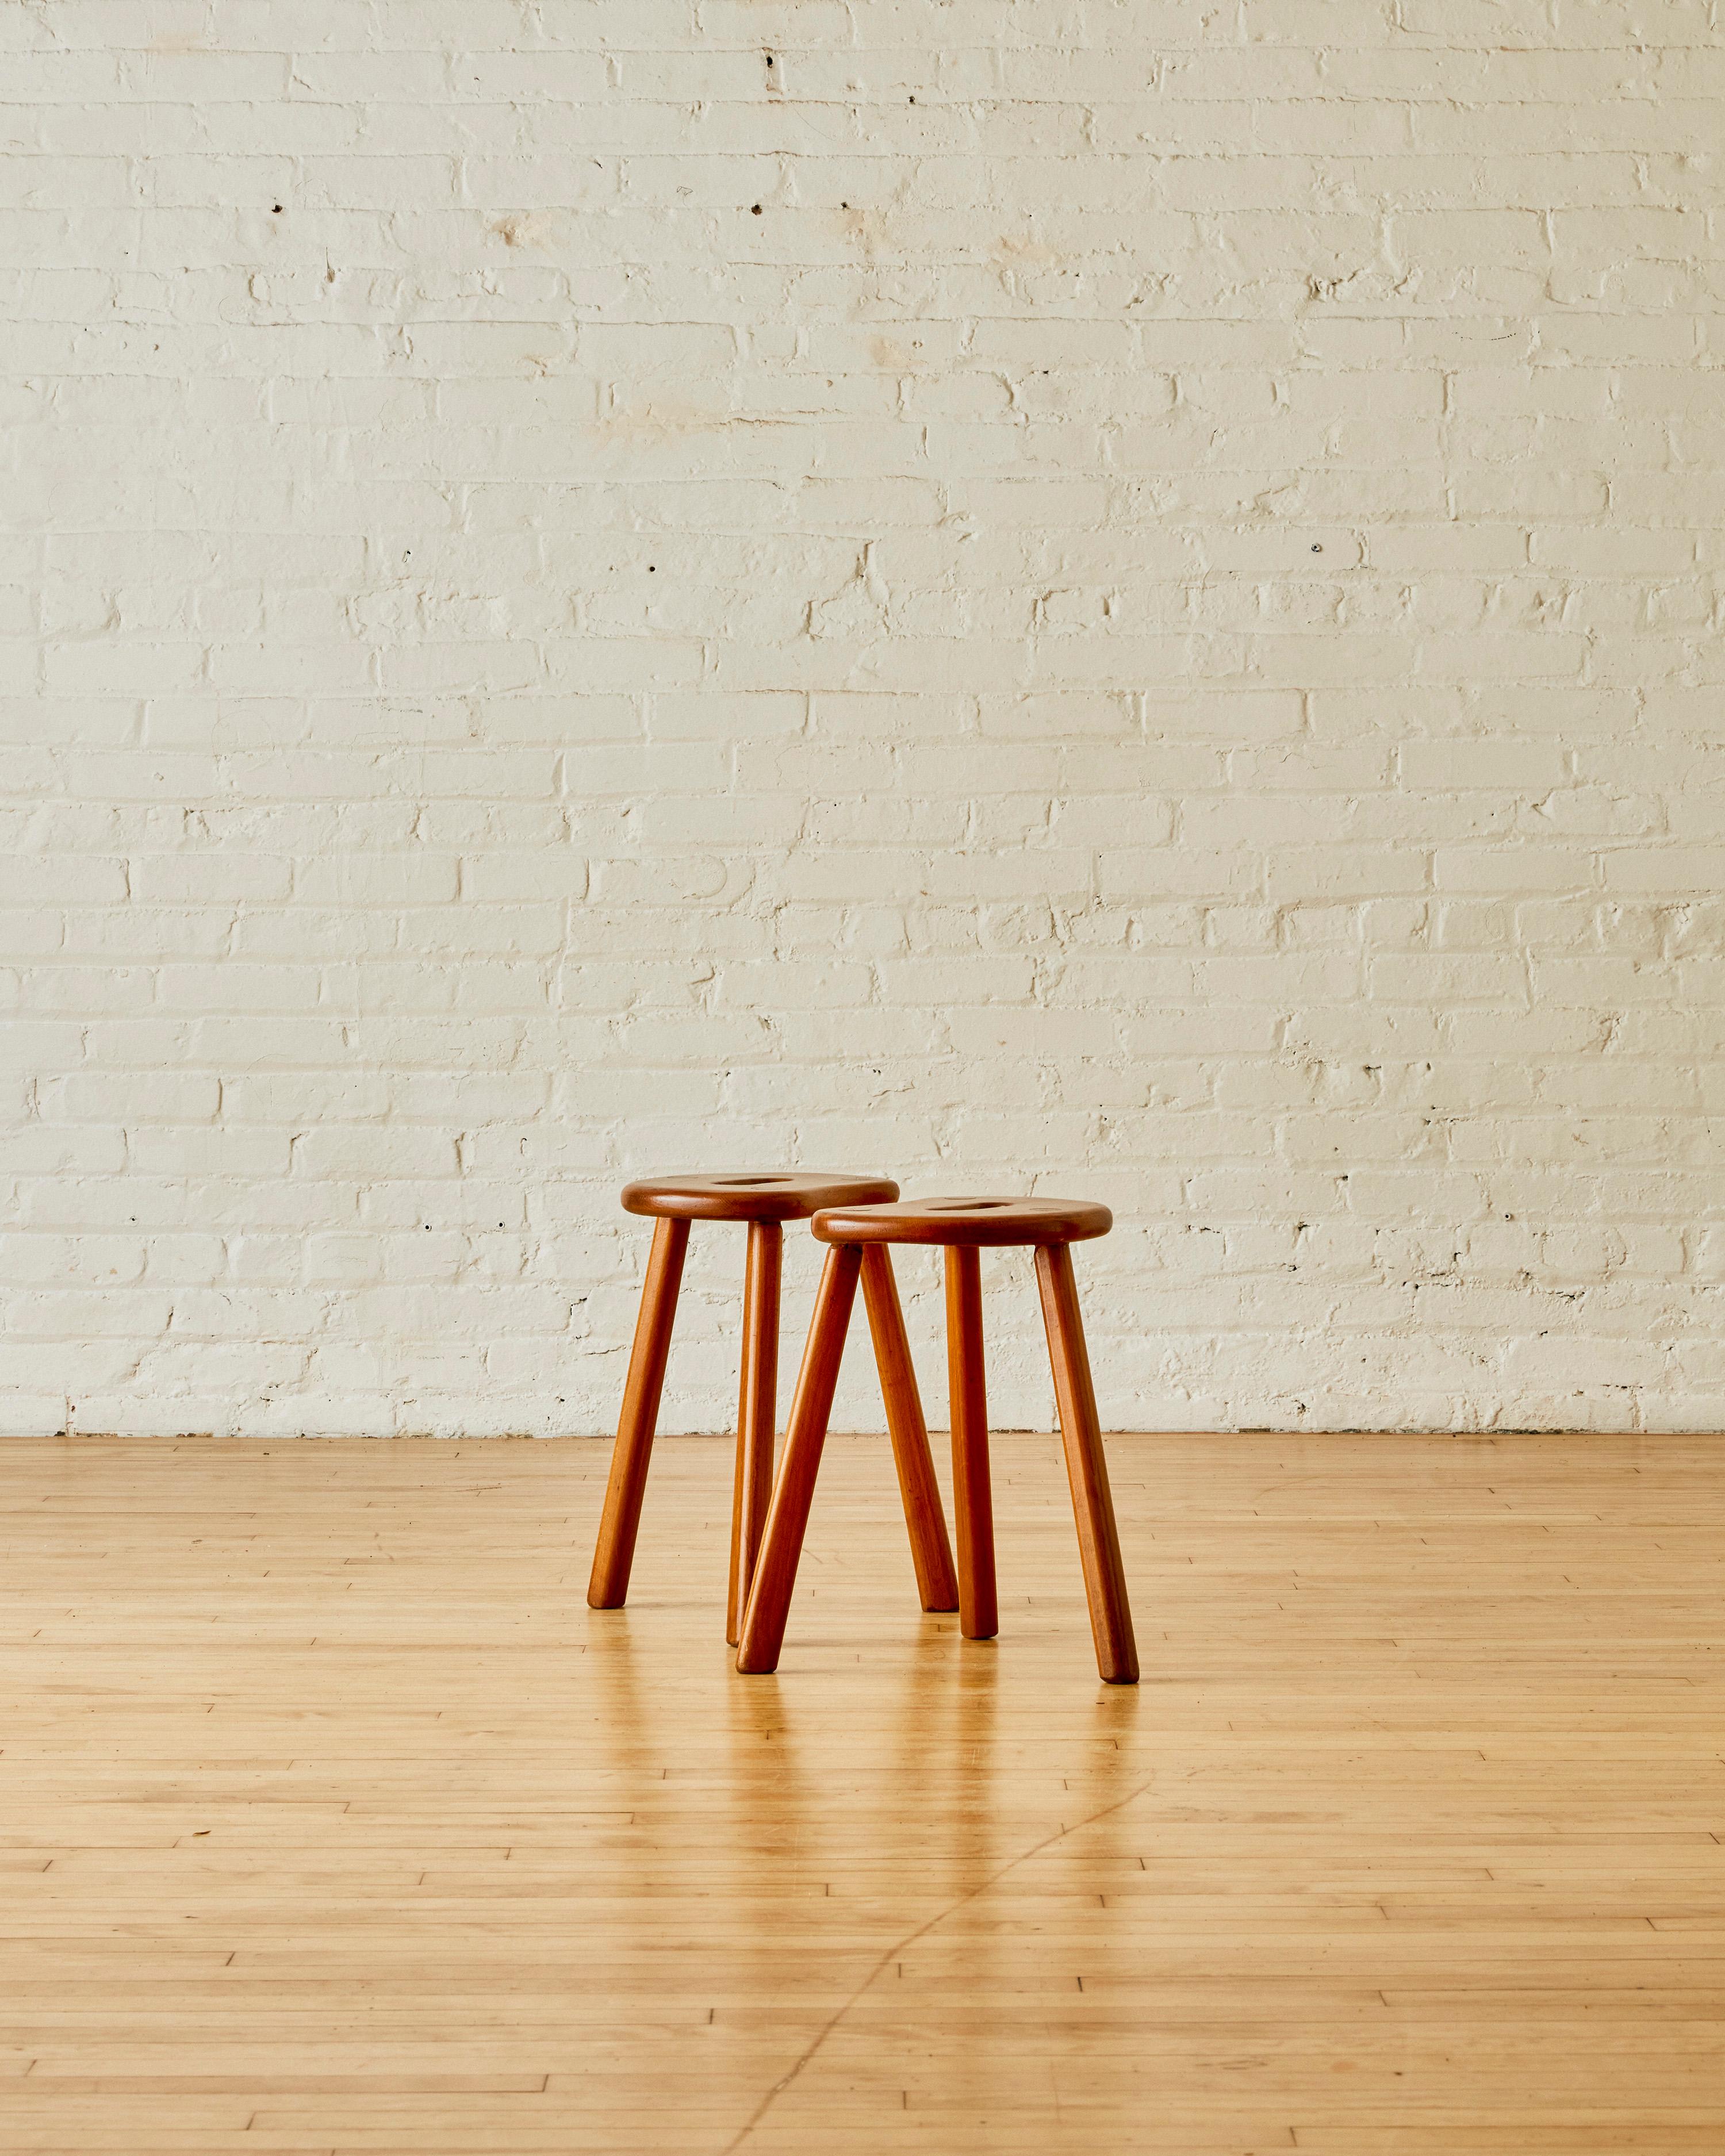 A Pair of Tripod Elm Wood Stools with oval openings on the seat. The stools can be sold individually for $1,400 each.

